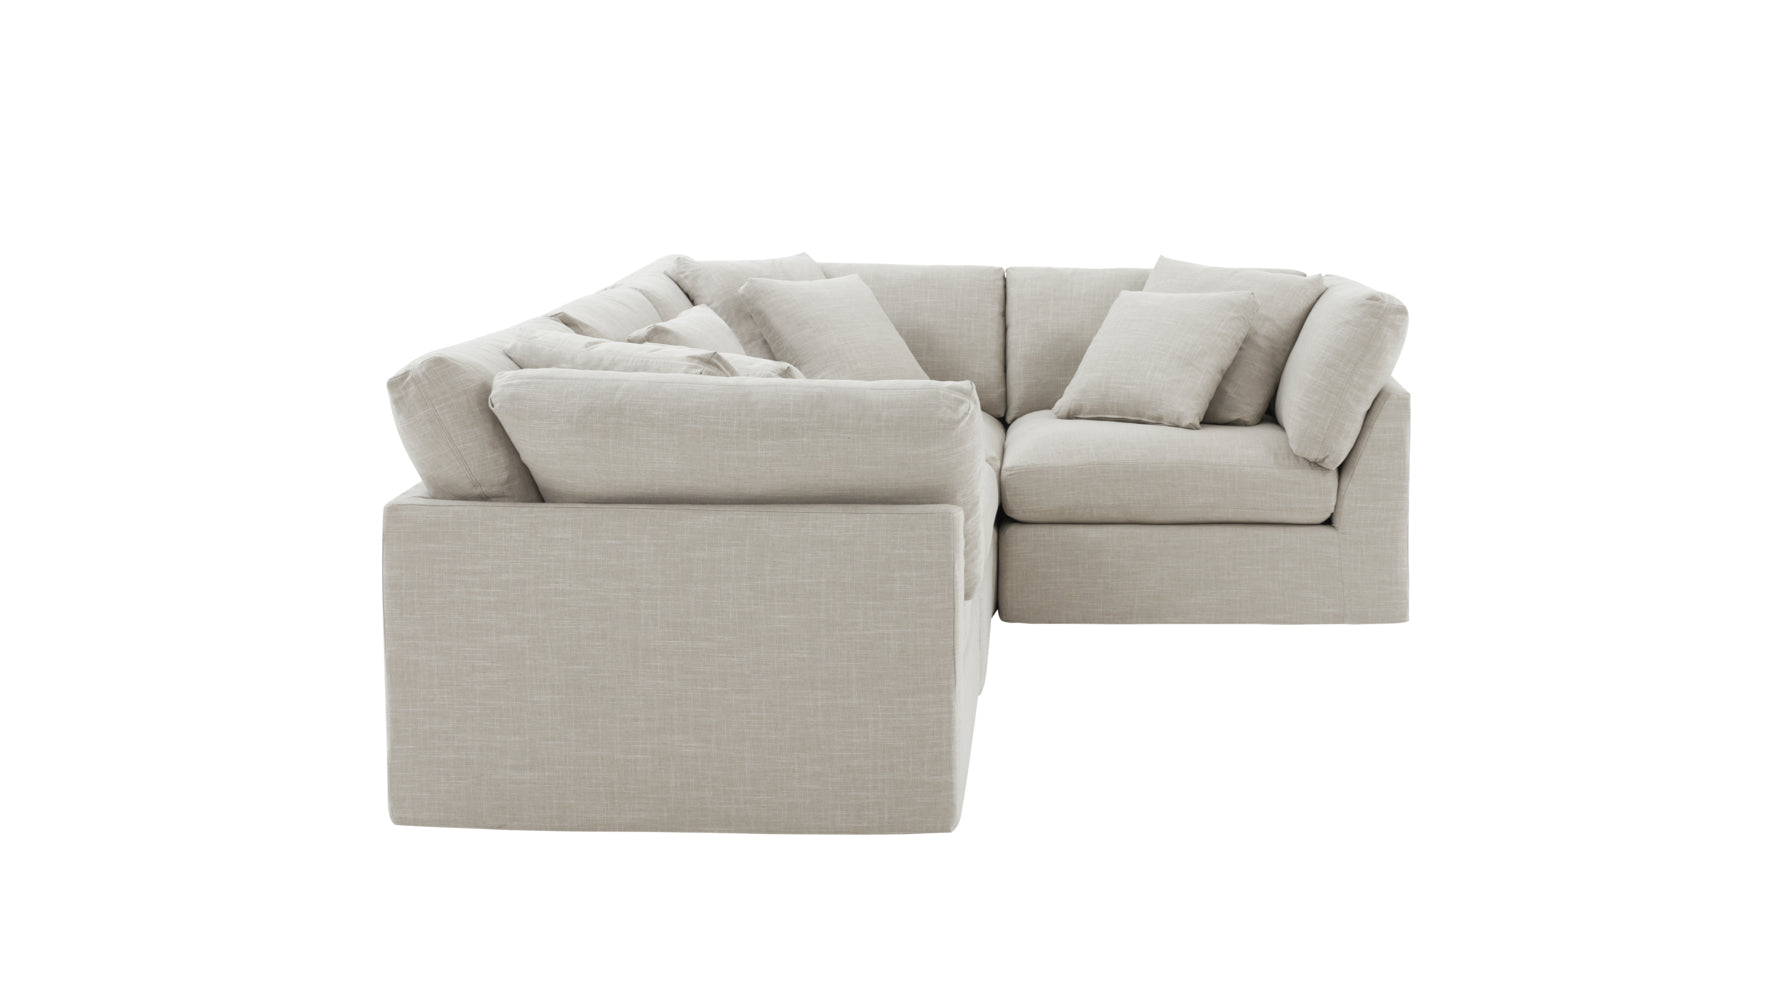 Get Together™ 4-Piece Modular Sectional Closed, Large, Light Pebble - Image 6